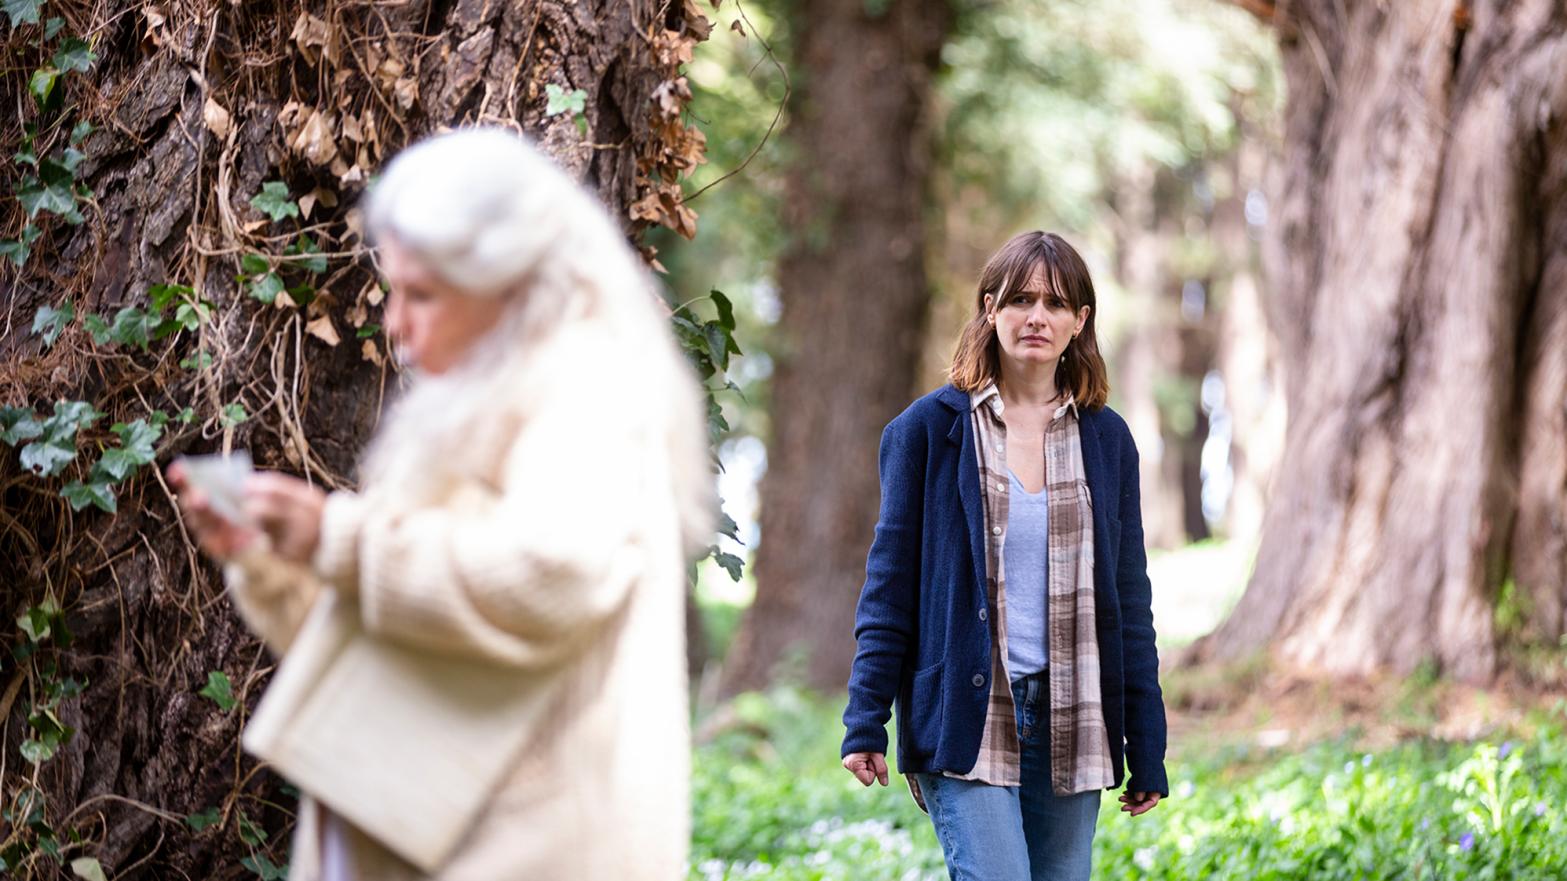 Edna (Robyn Nevin) and Kay (Emily Mortimer) in Relic. (Photo: IFC Midnight)